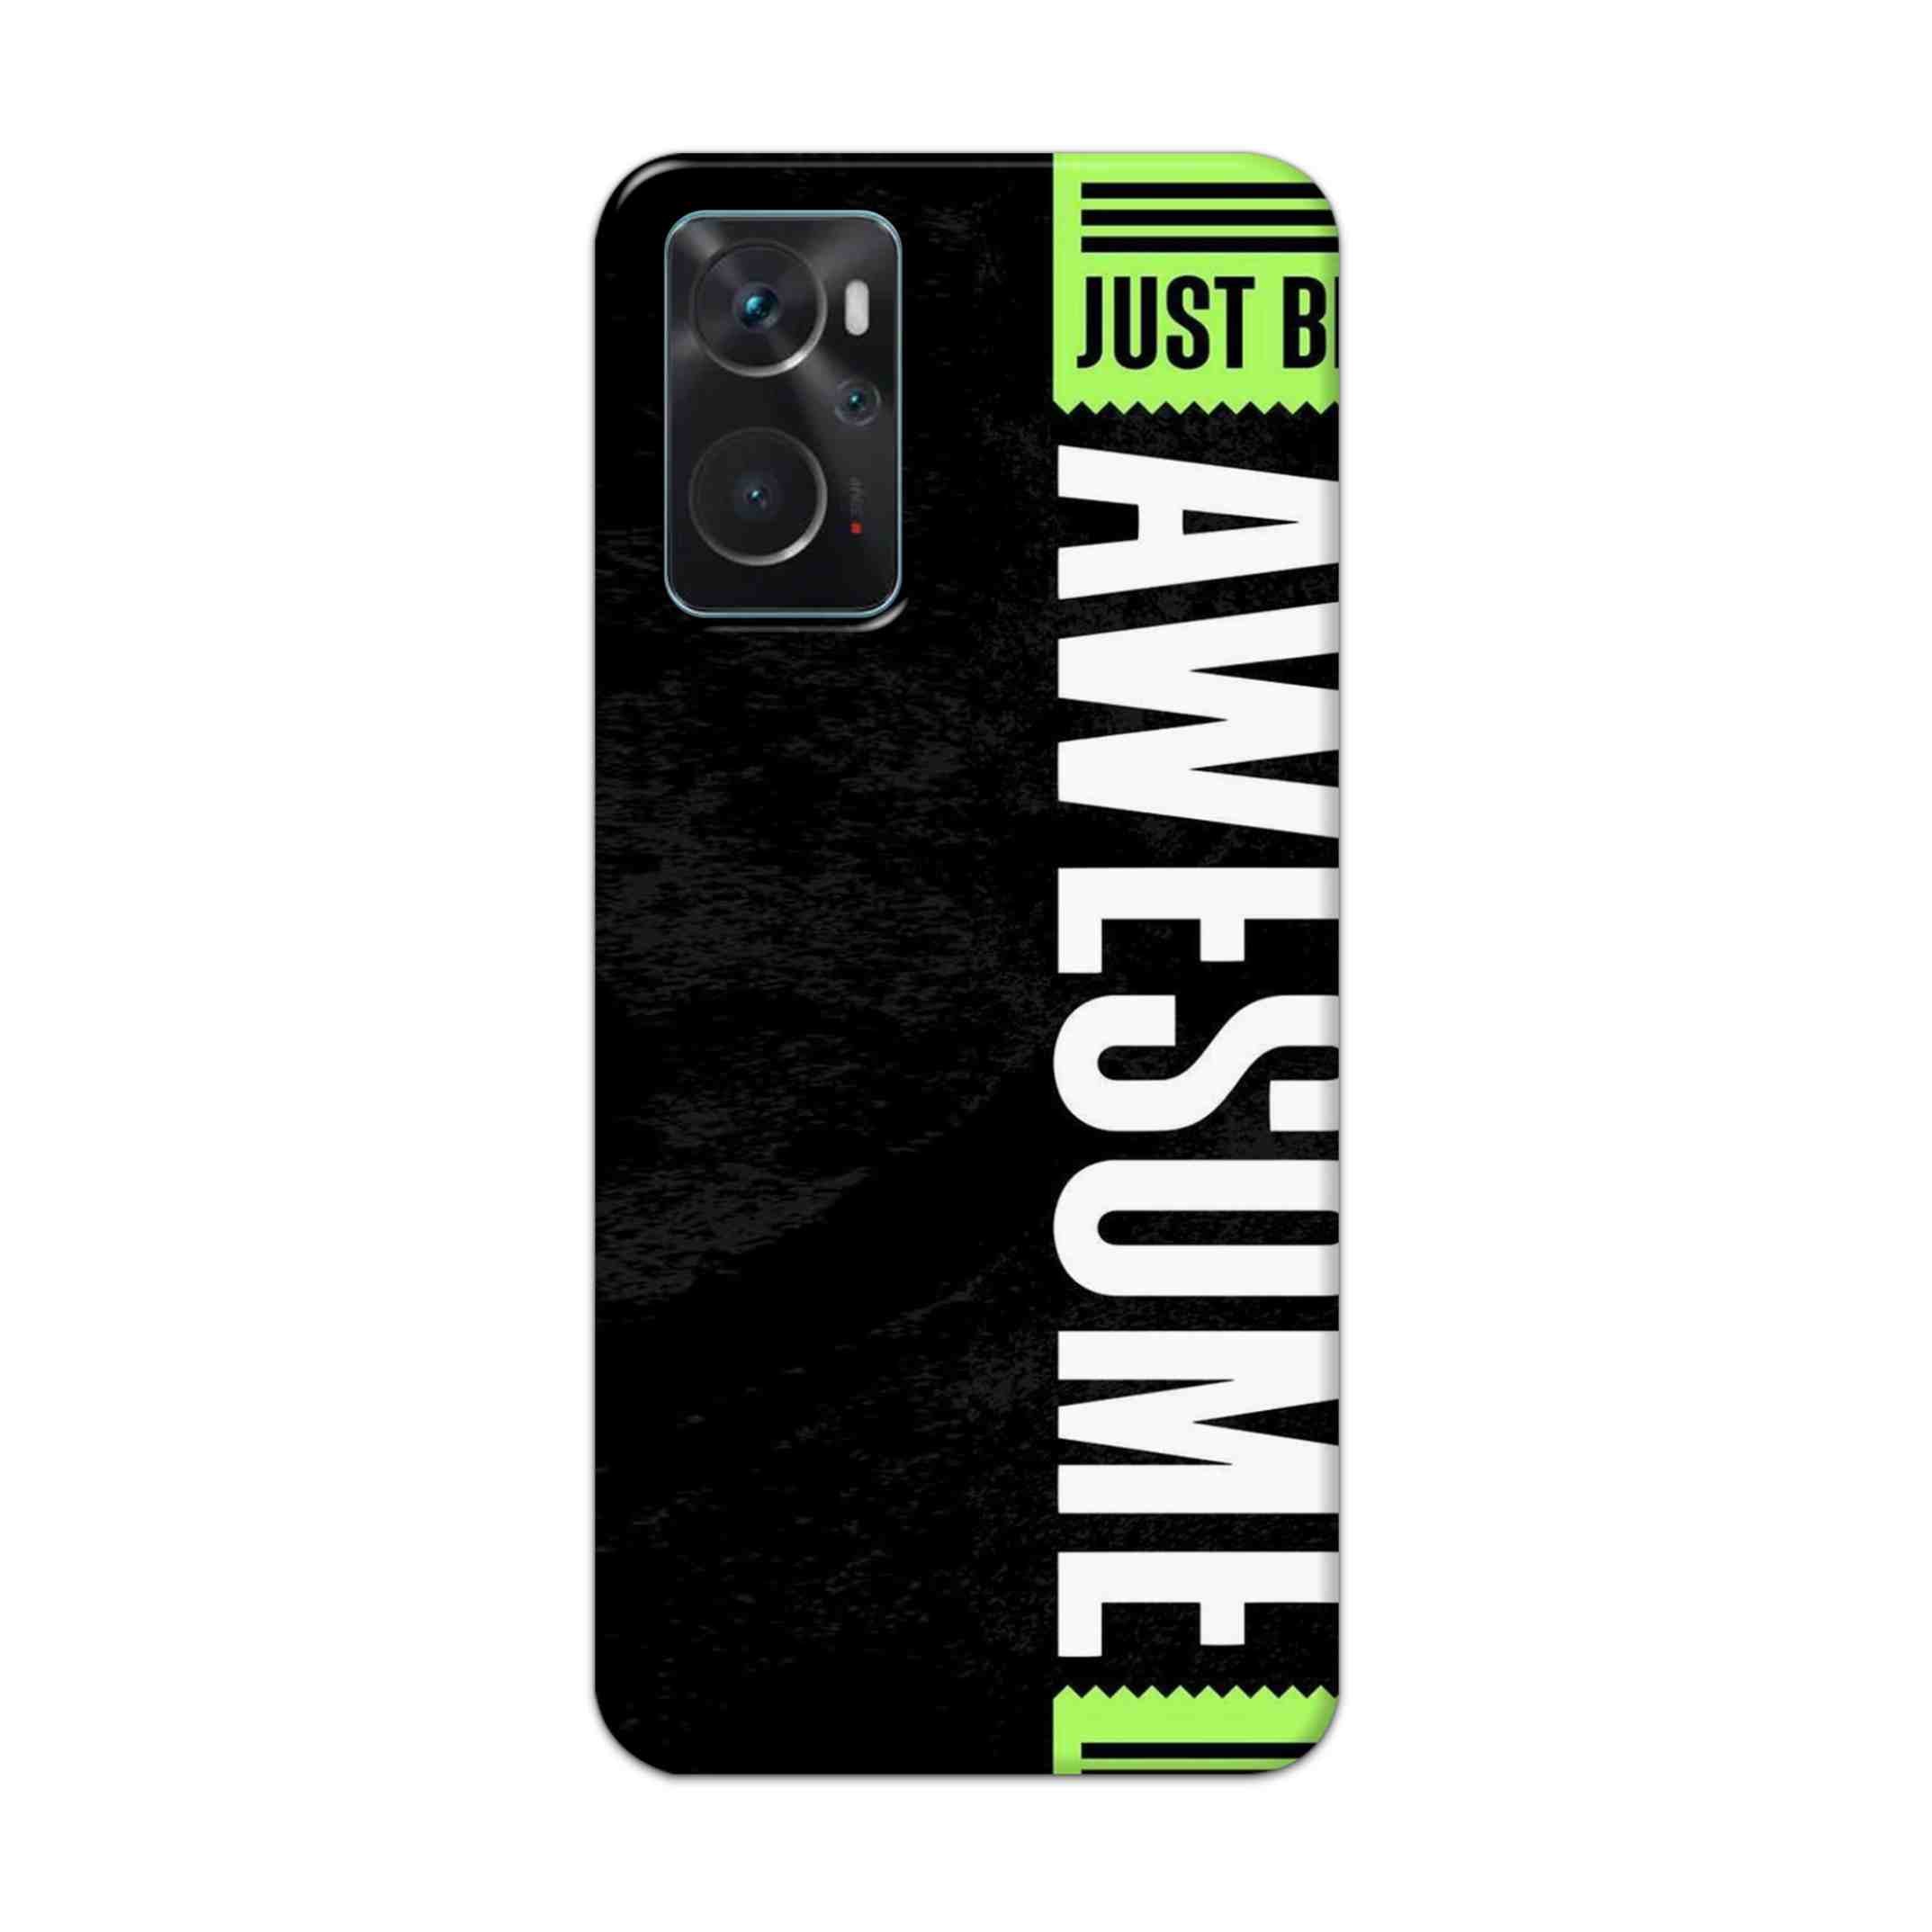 Buy Awesome Street Hard Back Mobile Phone Case Cover For Oppo K10 Online